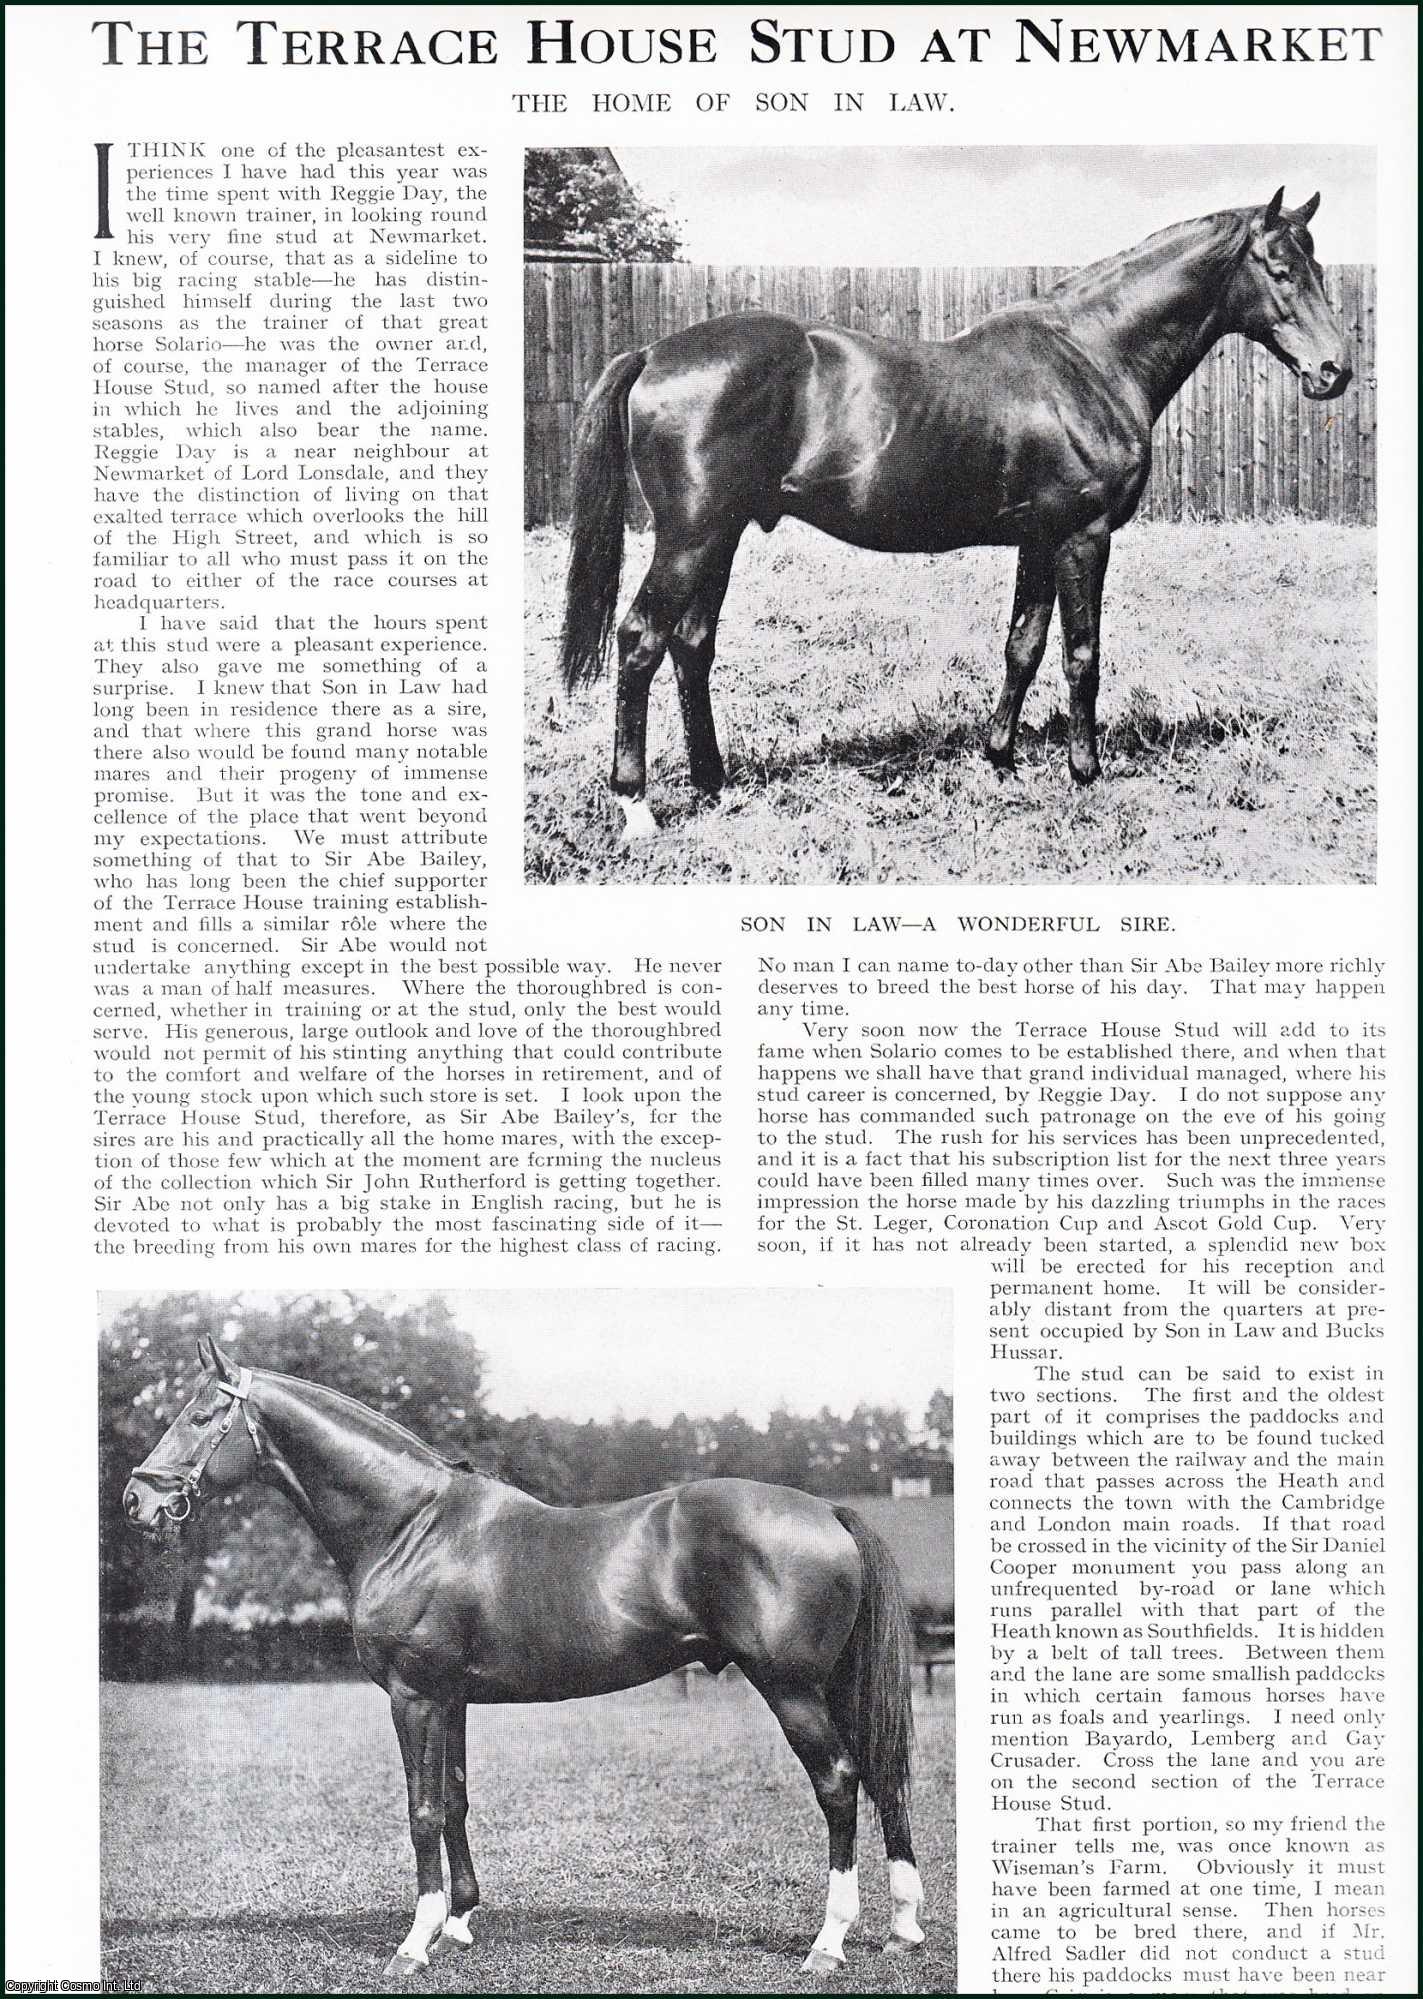 Country Life Magazine - The Terrace House Stud at Newmarket : the home of son in law. Several pictures and accompanying text, removed from an original issue of Country Life Magazine, 1926.